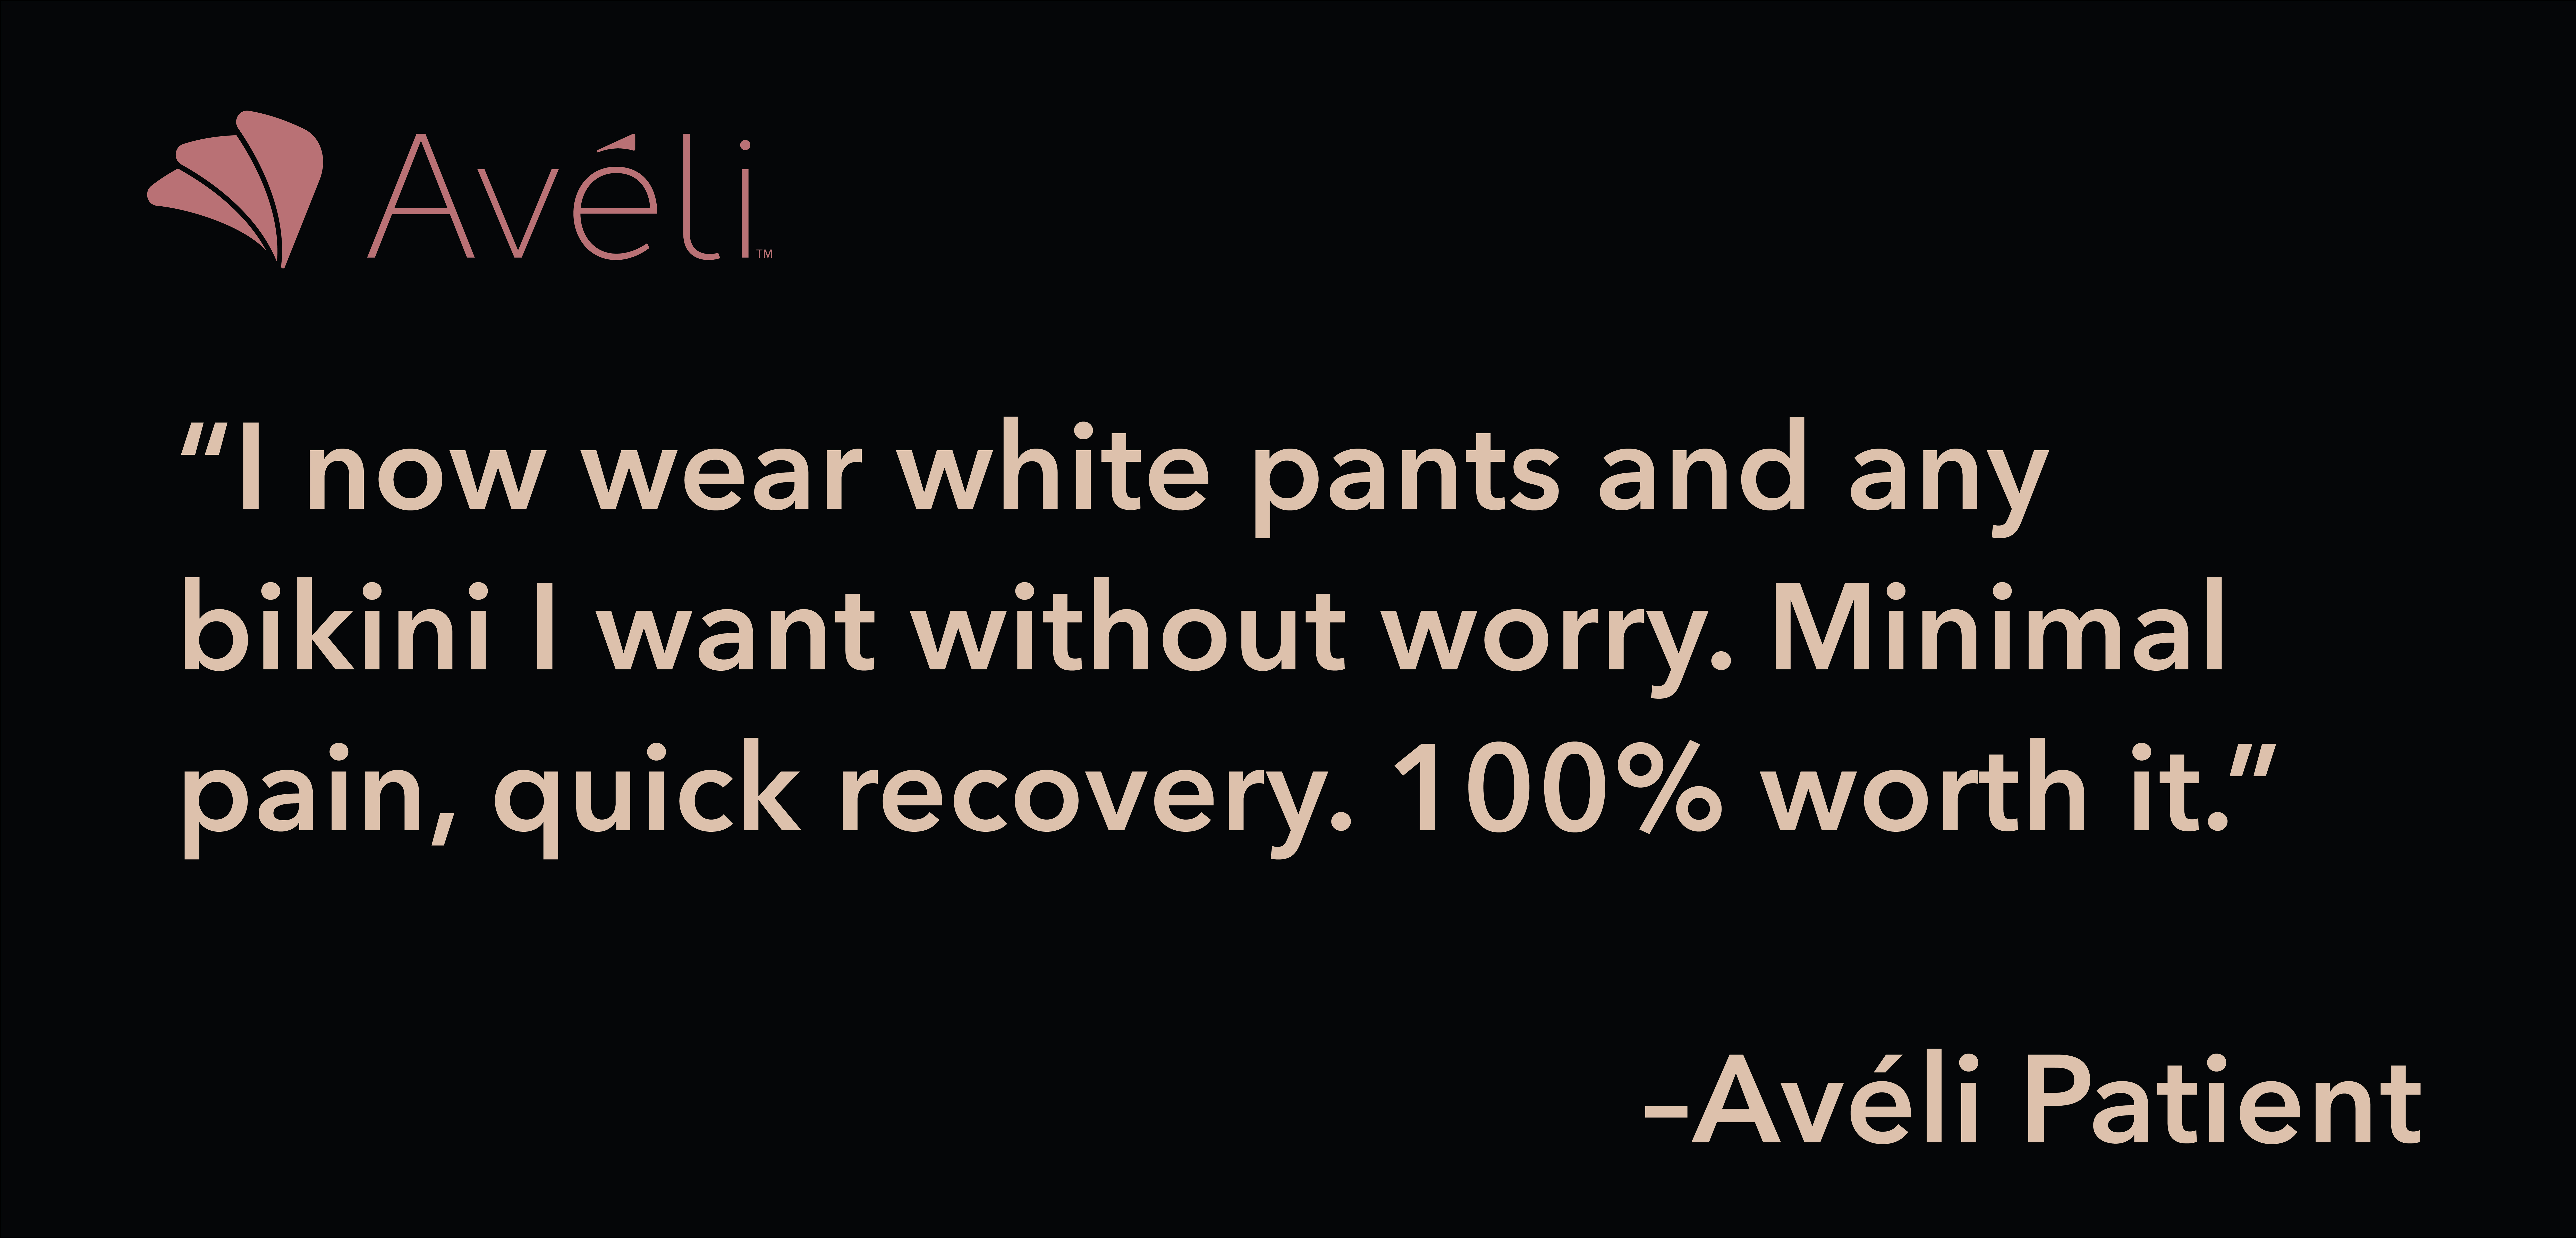 Avéli provides women with a meaningful and lasting solution that targets their cellulite in the areas that have frustrated them the most - their buttocks and thighs.